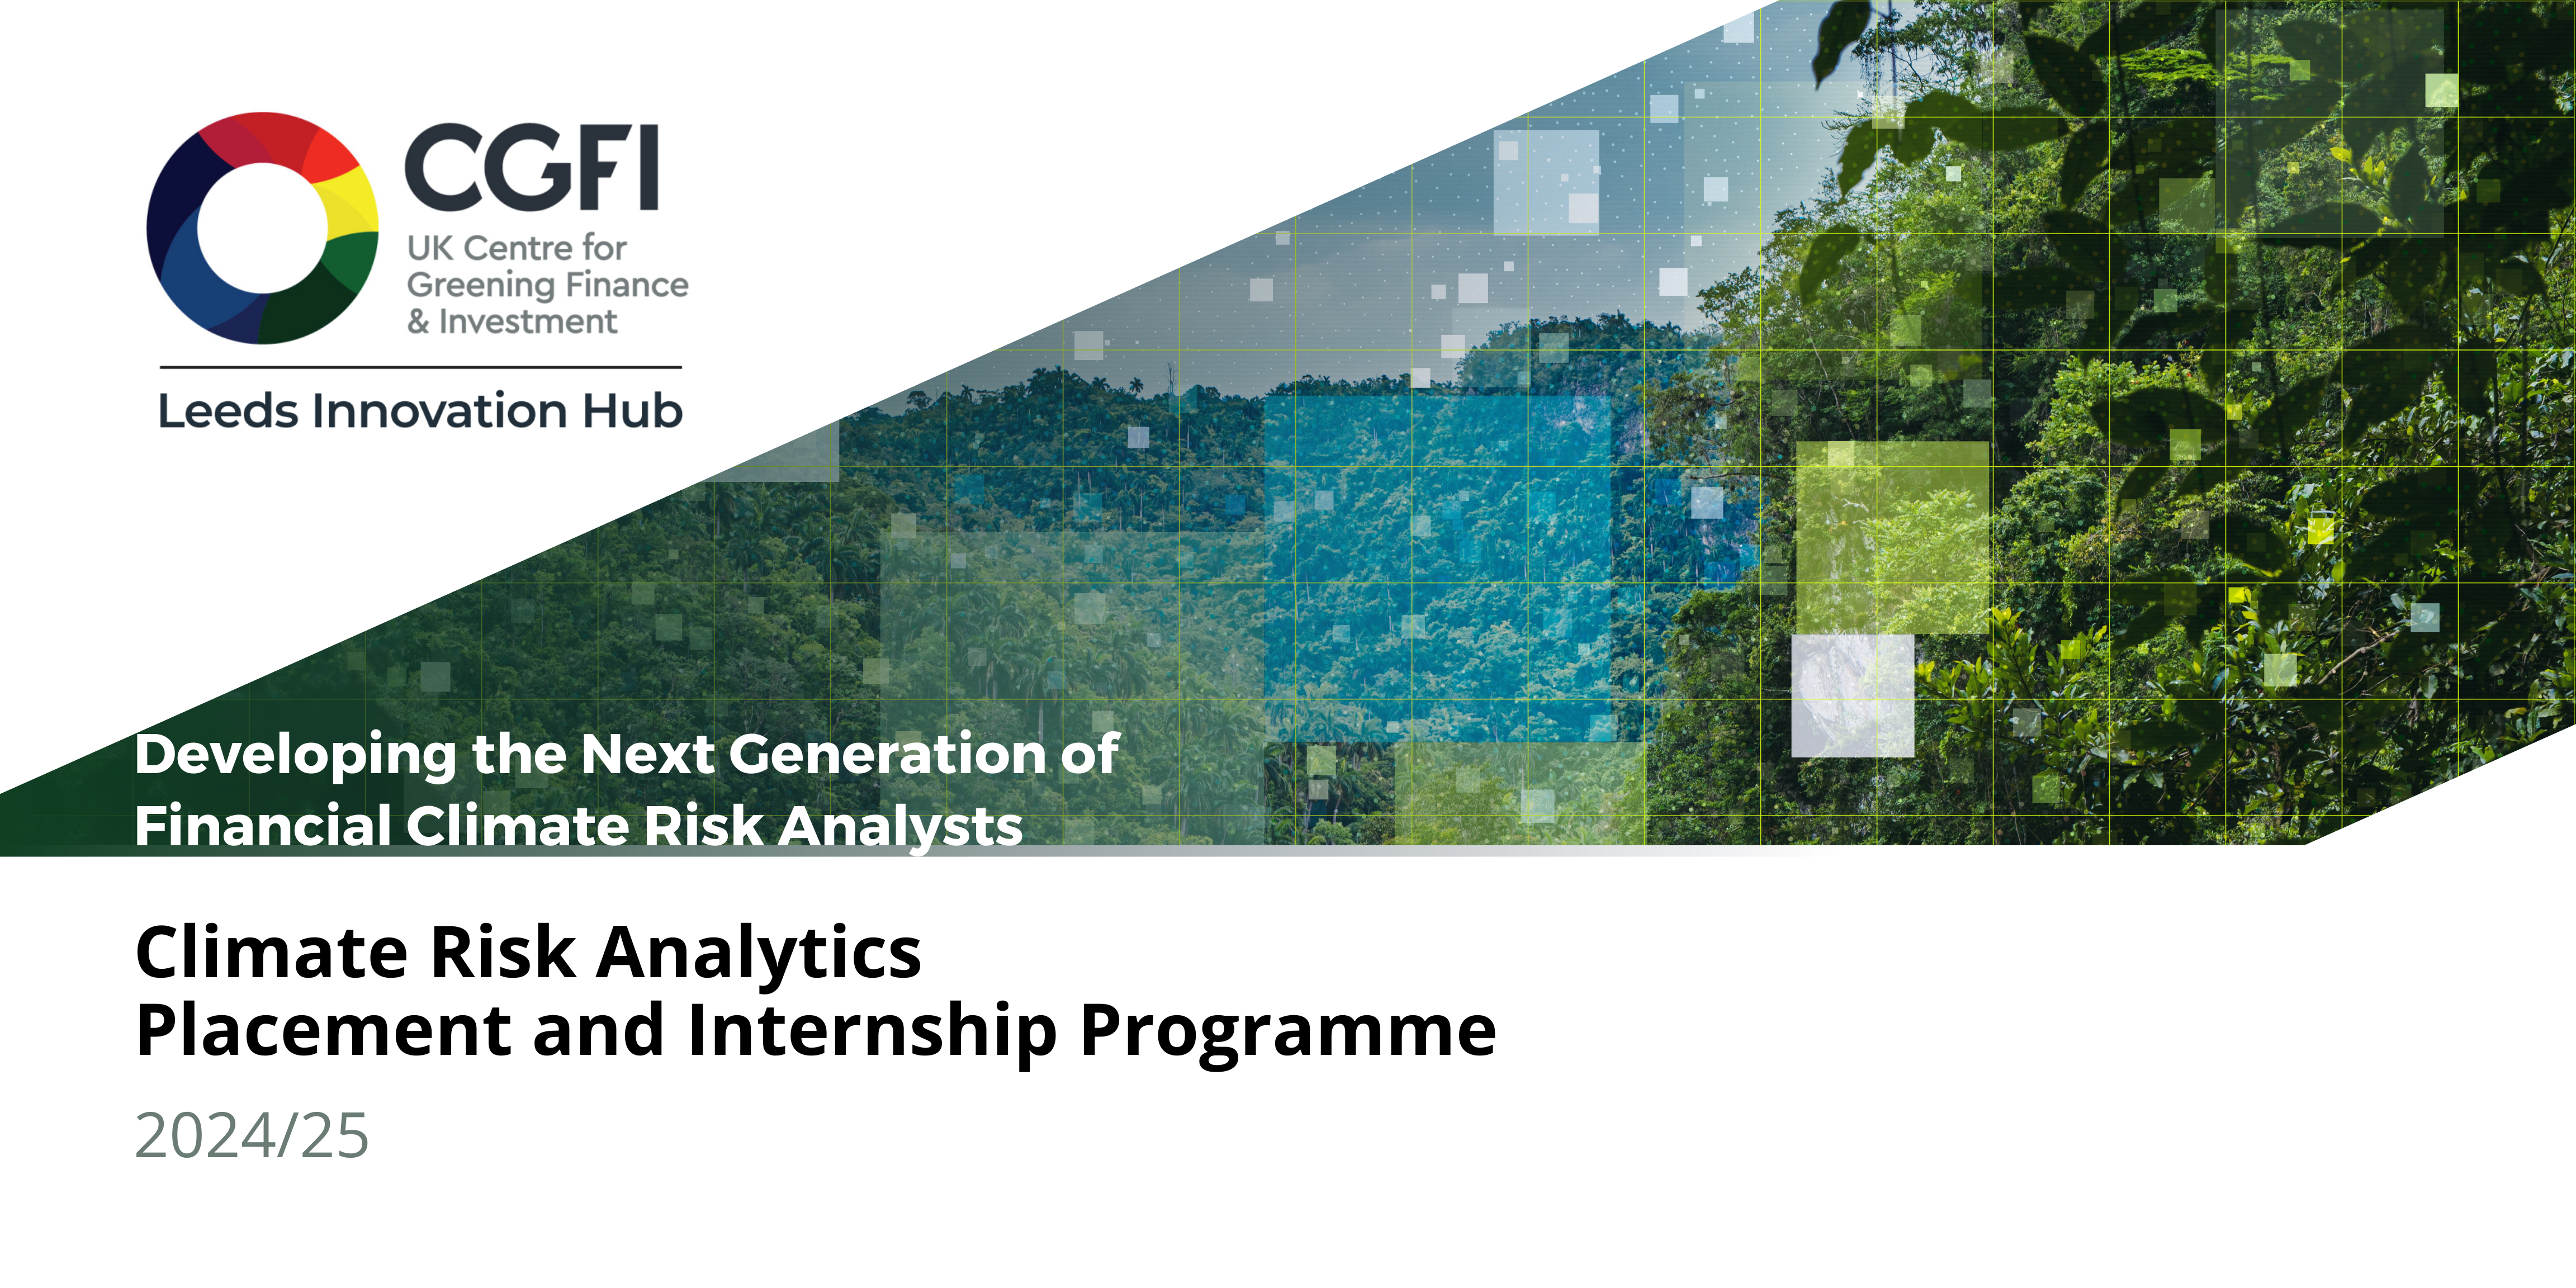 Developing the next generation of financial climate risk analysts.